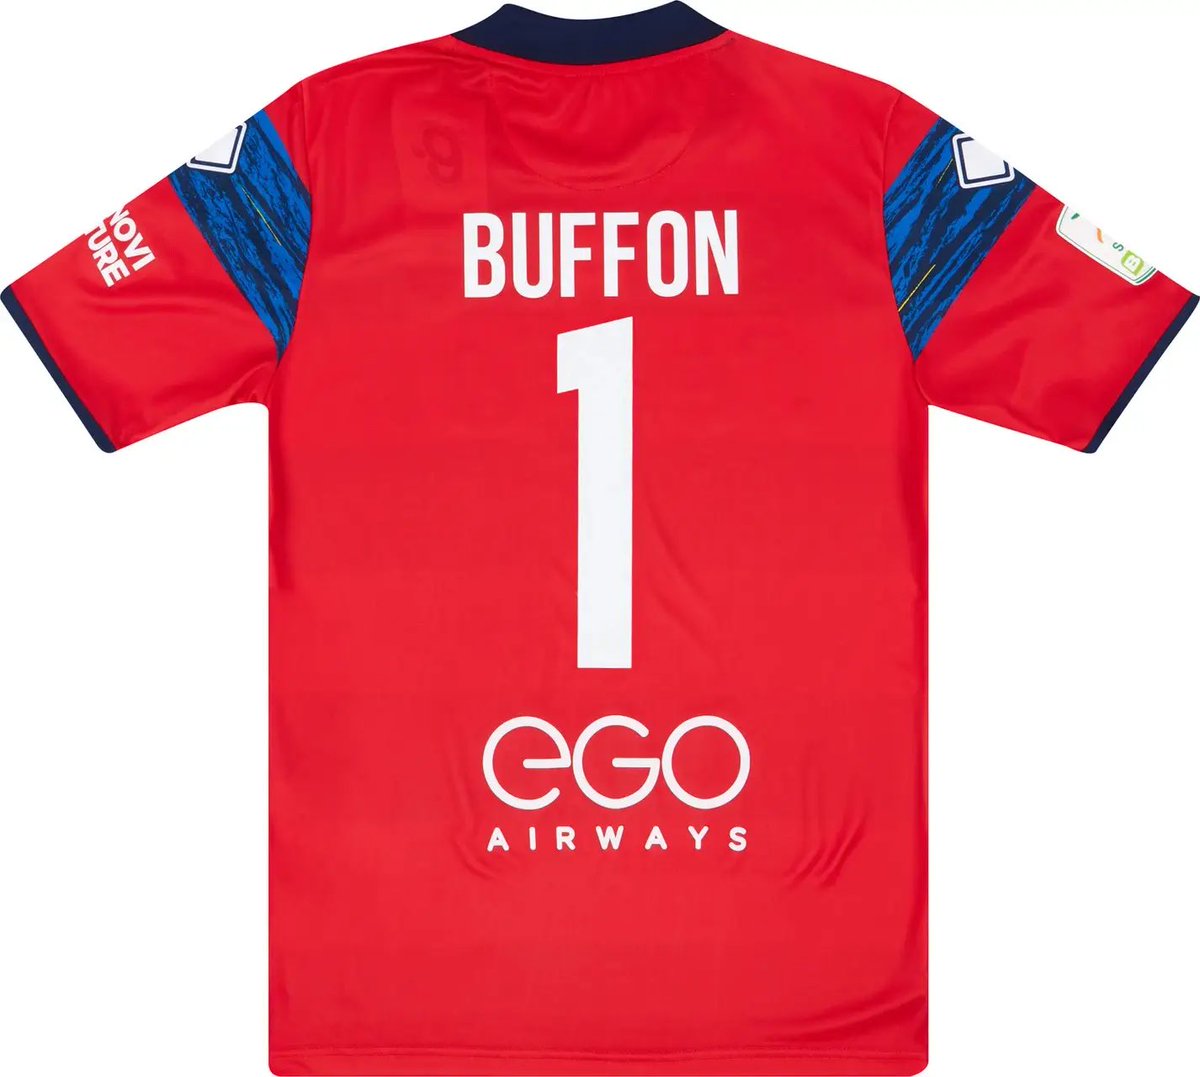 🇮🇹 CFS DEAL 🇮🇹 Parma 21/22 Buffon nameset Serie B patch Sizes M and L £45 with code KITSMAN10 #ad #parma 👉 classicfootballshirts.co.uk/2021-22-parma-…